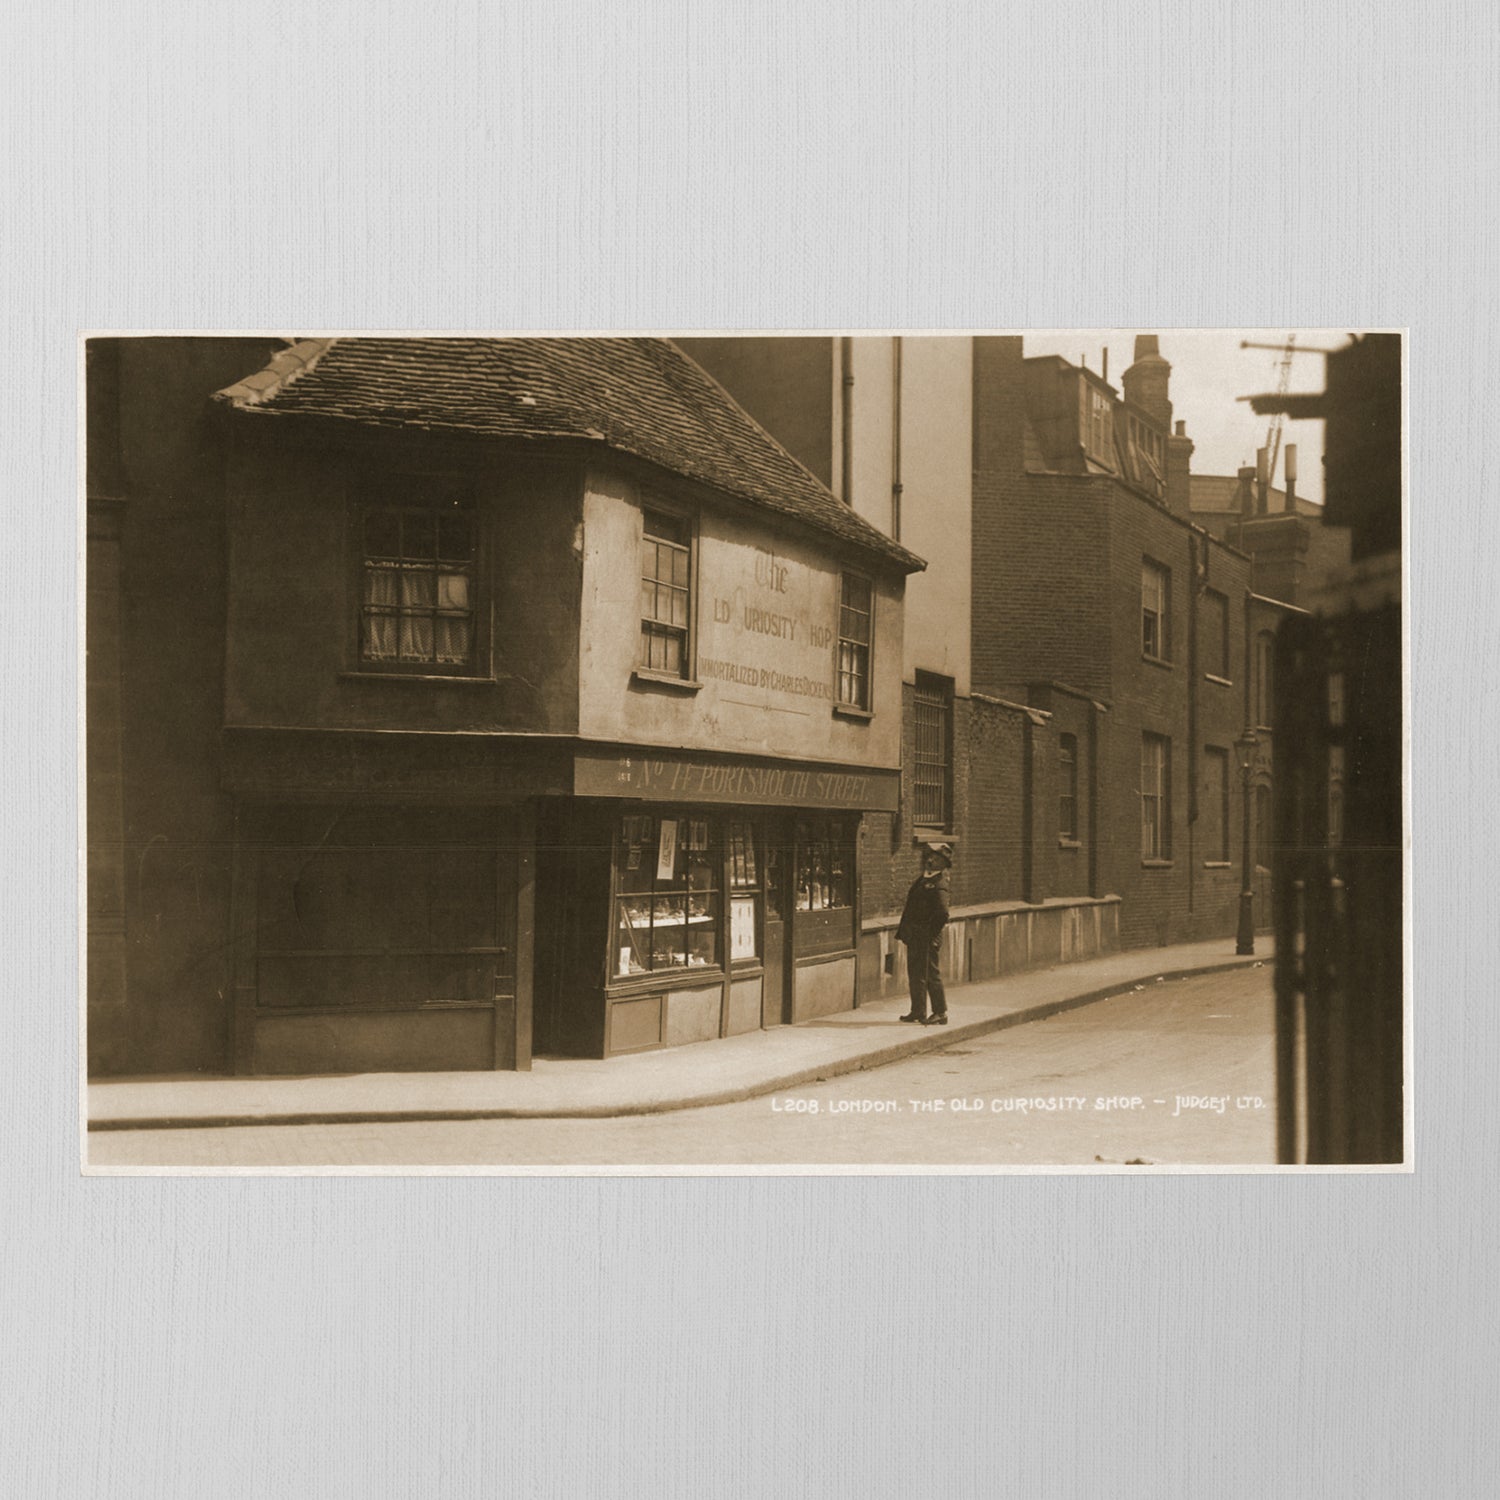 The Old Curiosity Shop by Unknown, c 1920